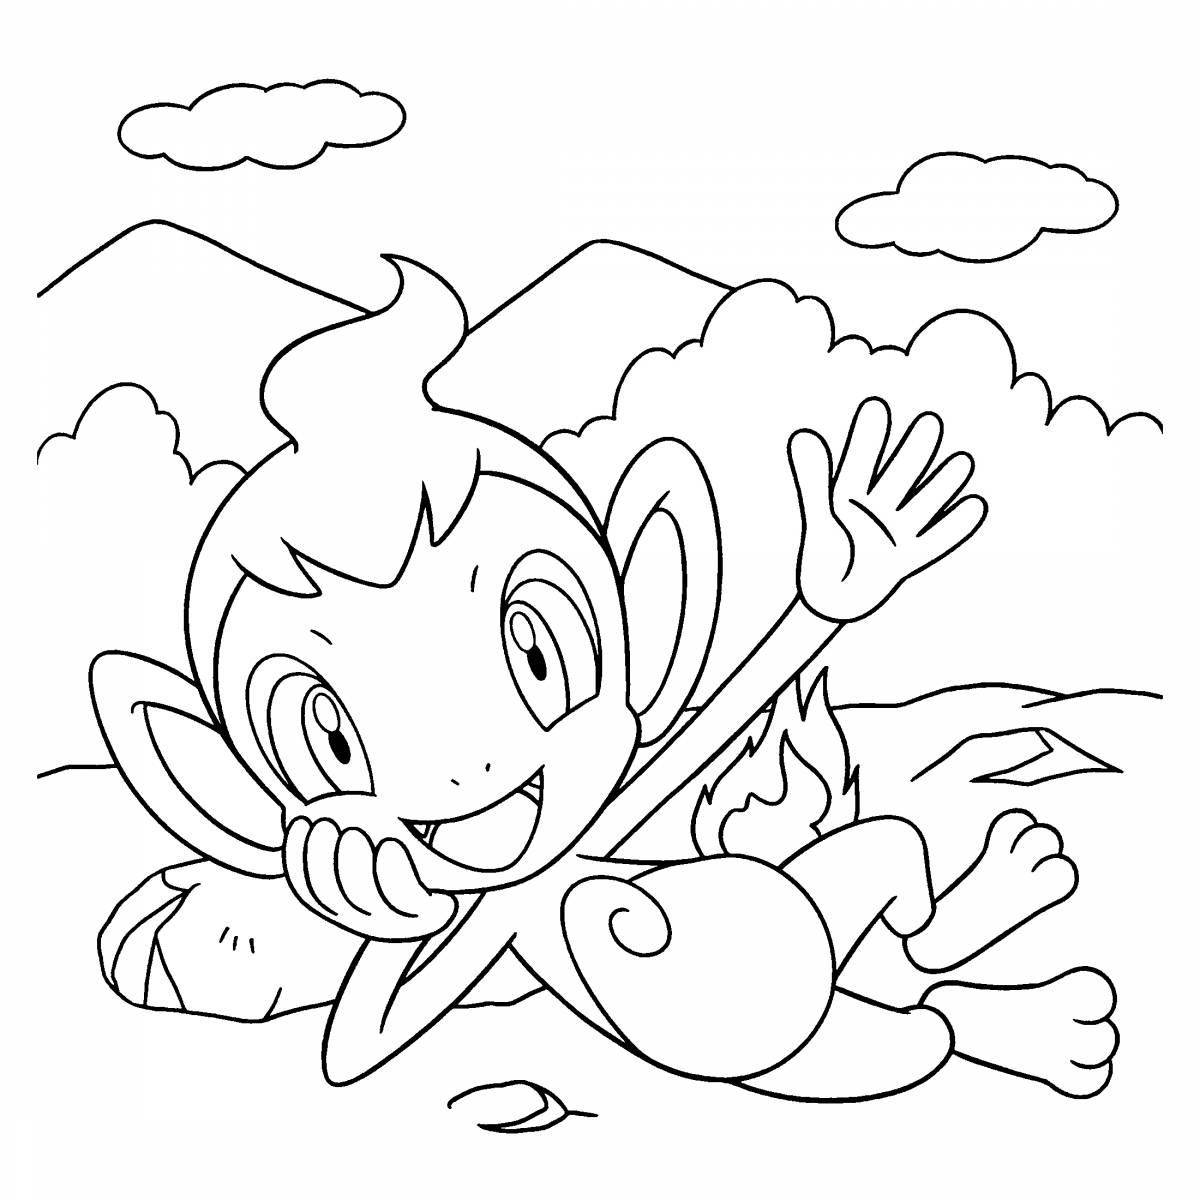 Charming chimchar coloring book